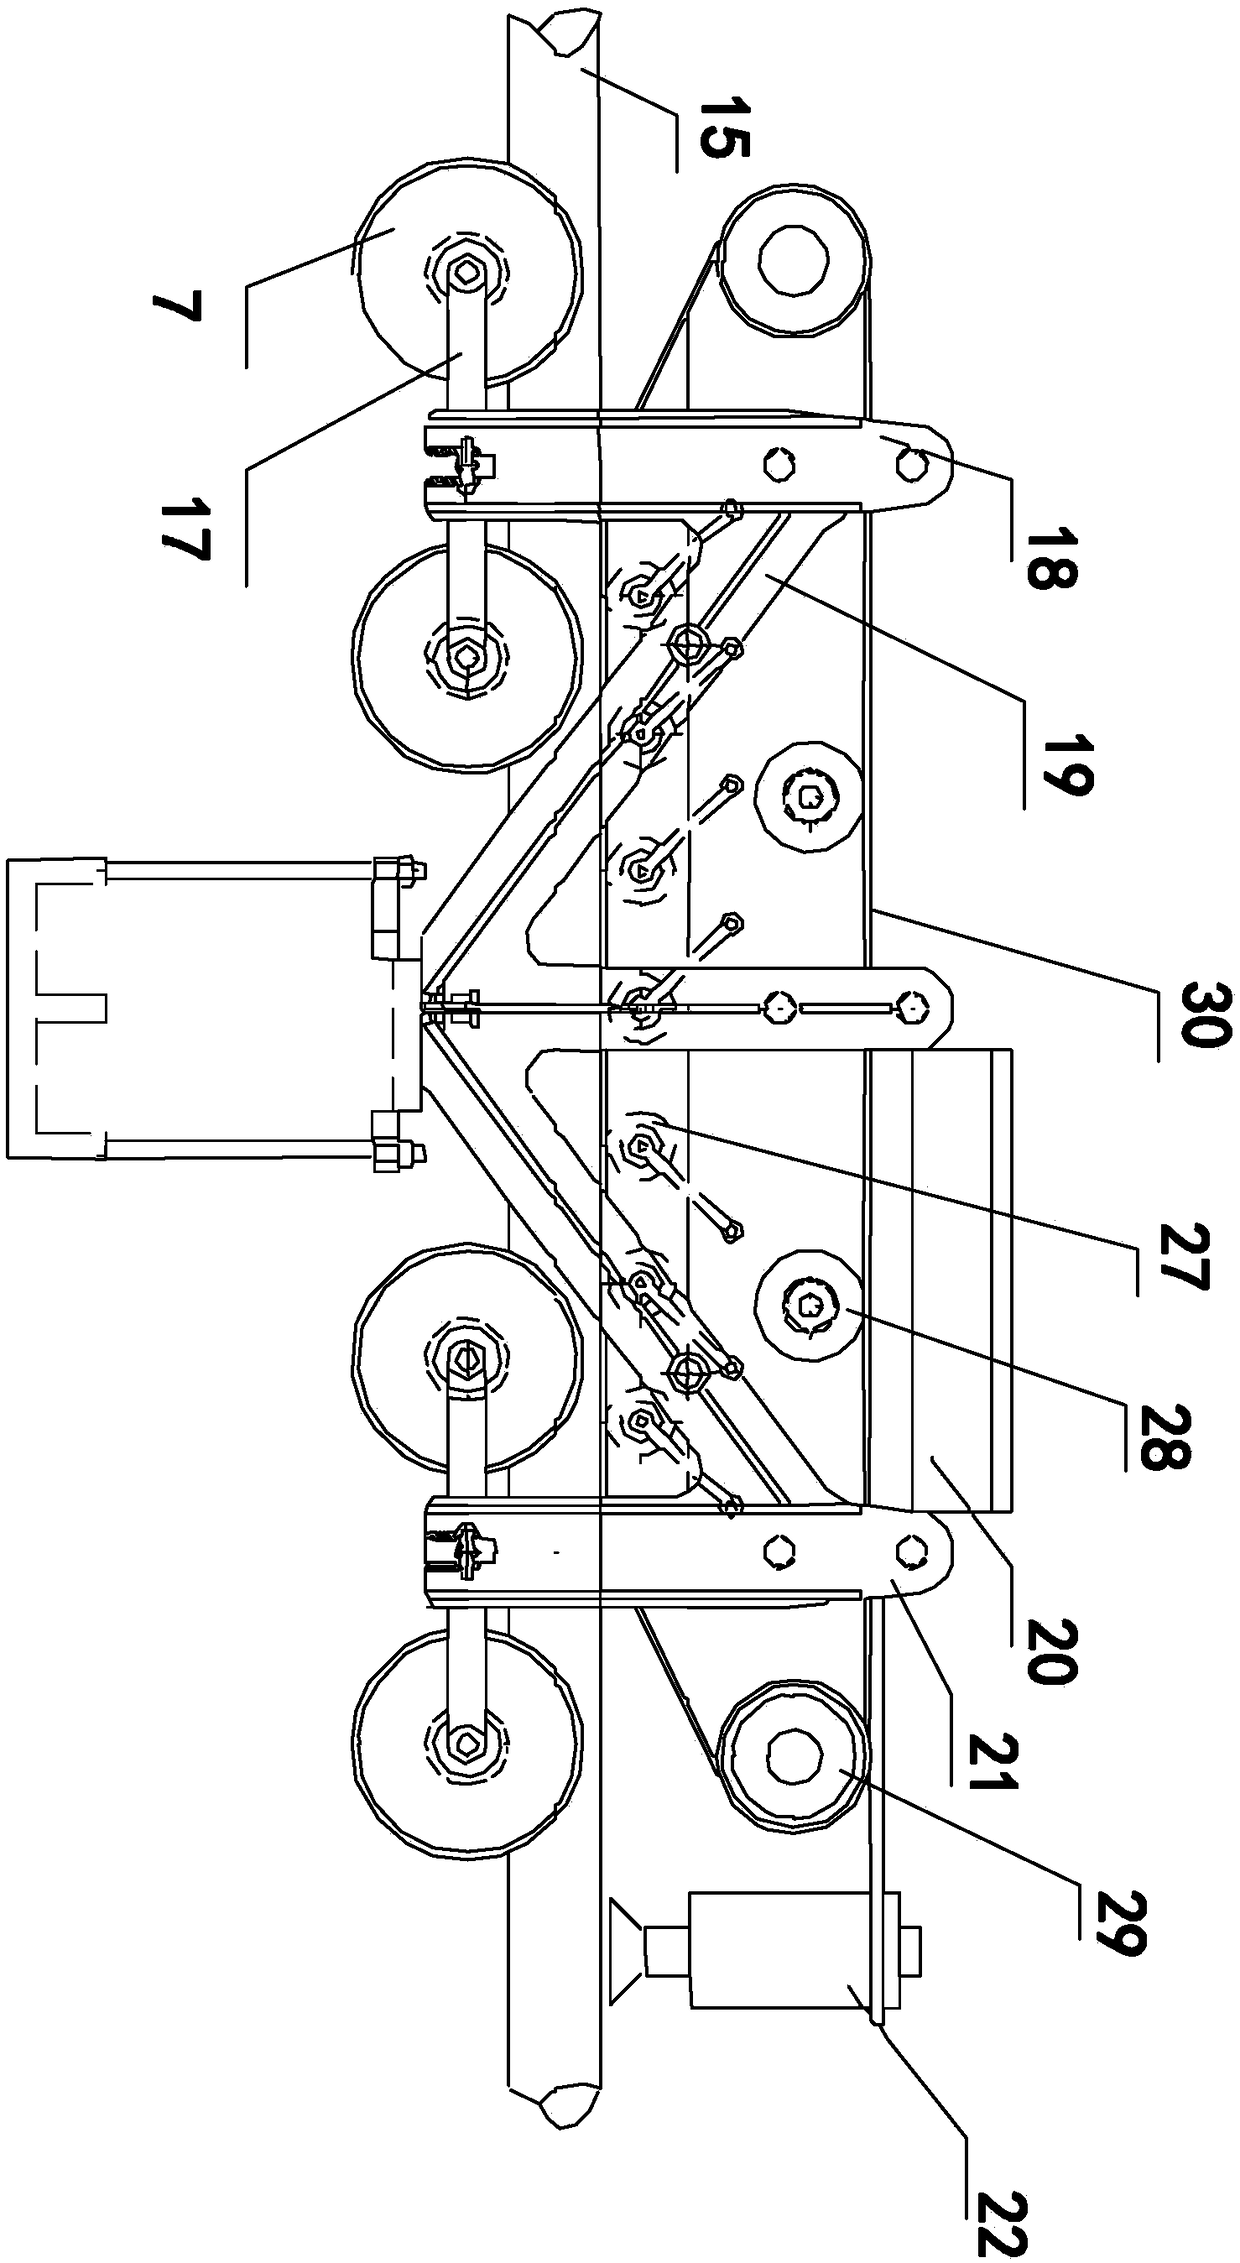 Automatic detection system and method for sag of power transmission line